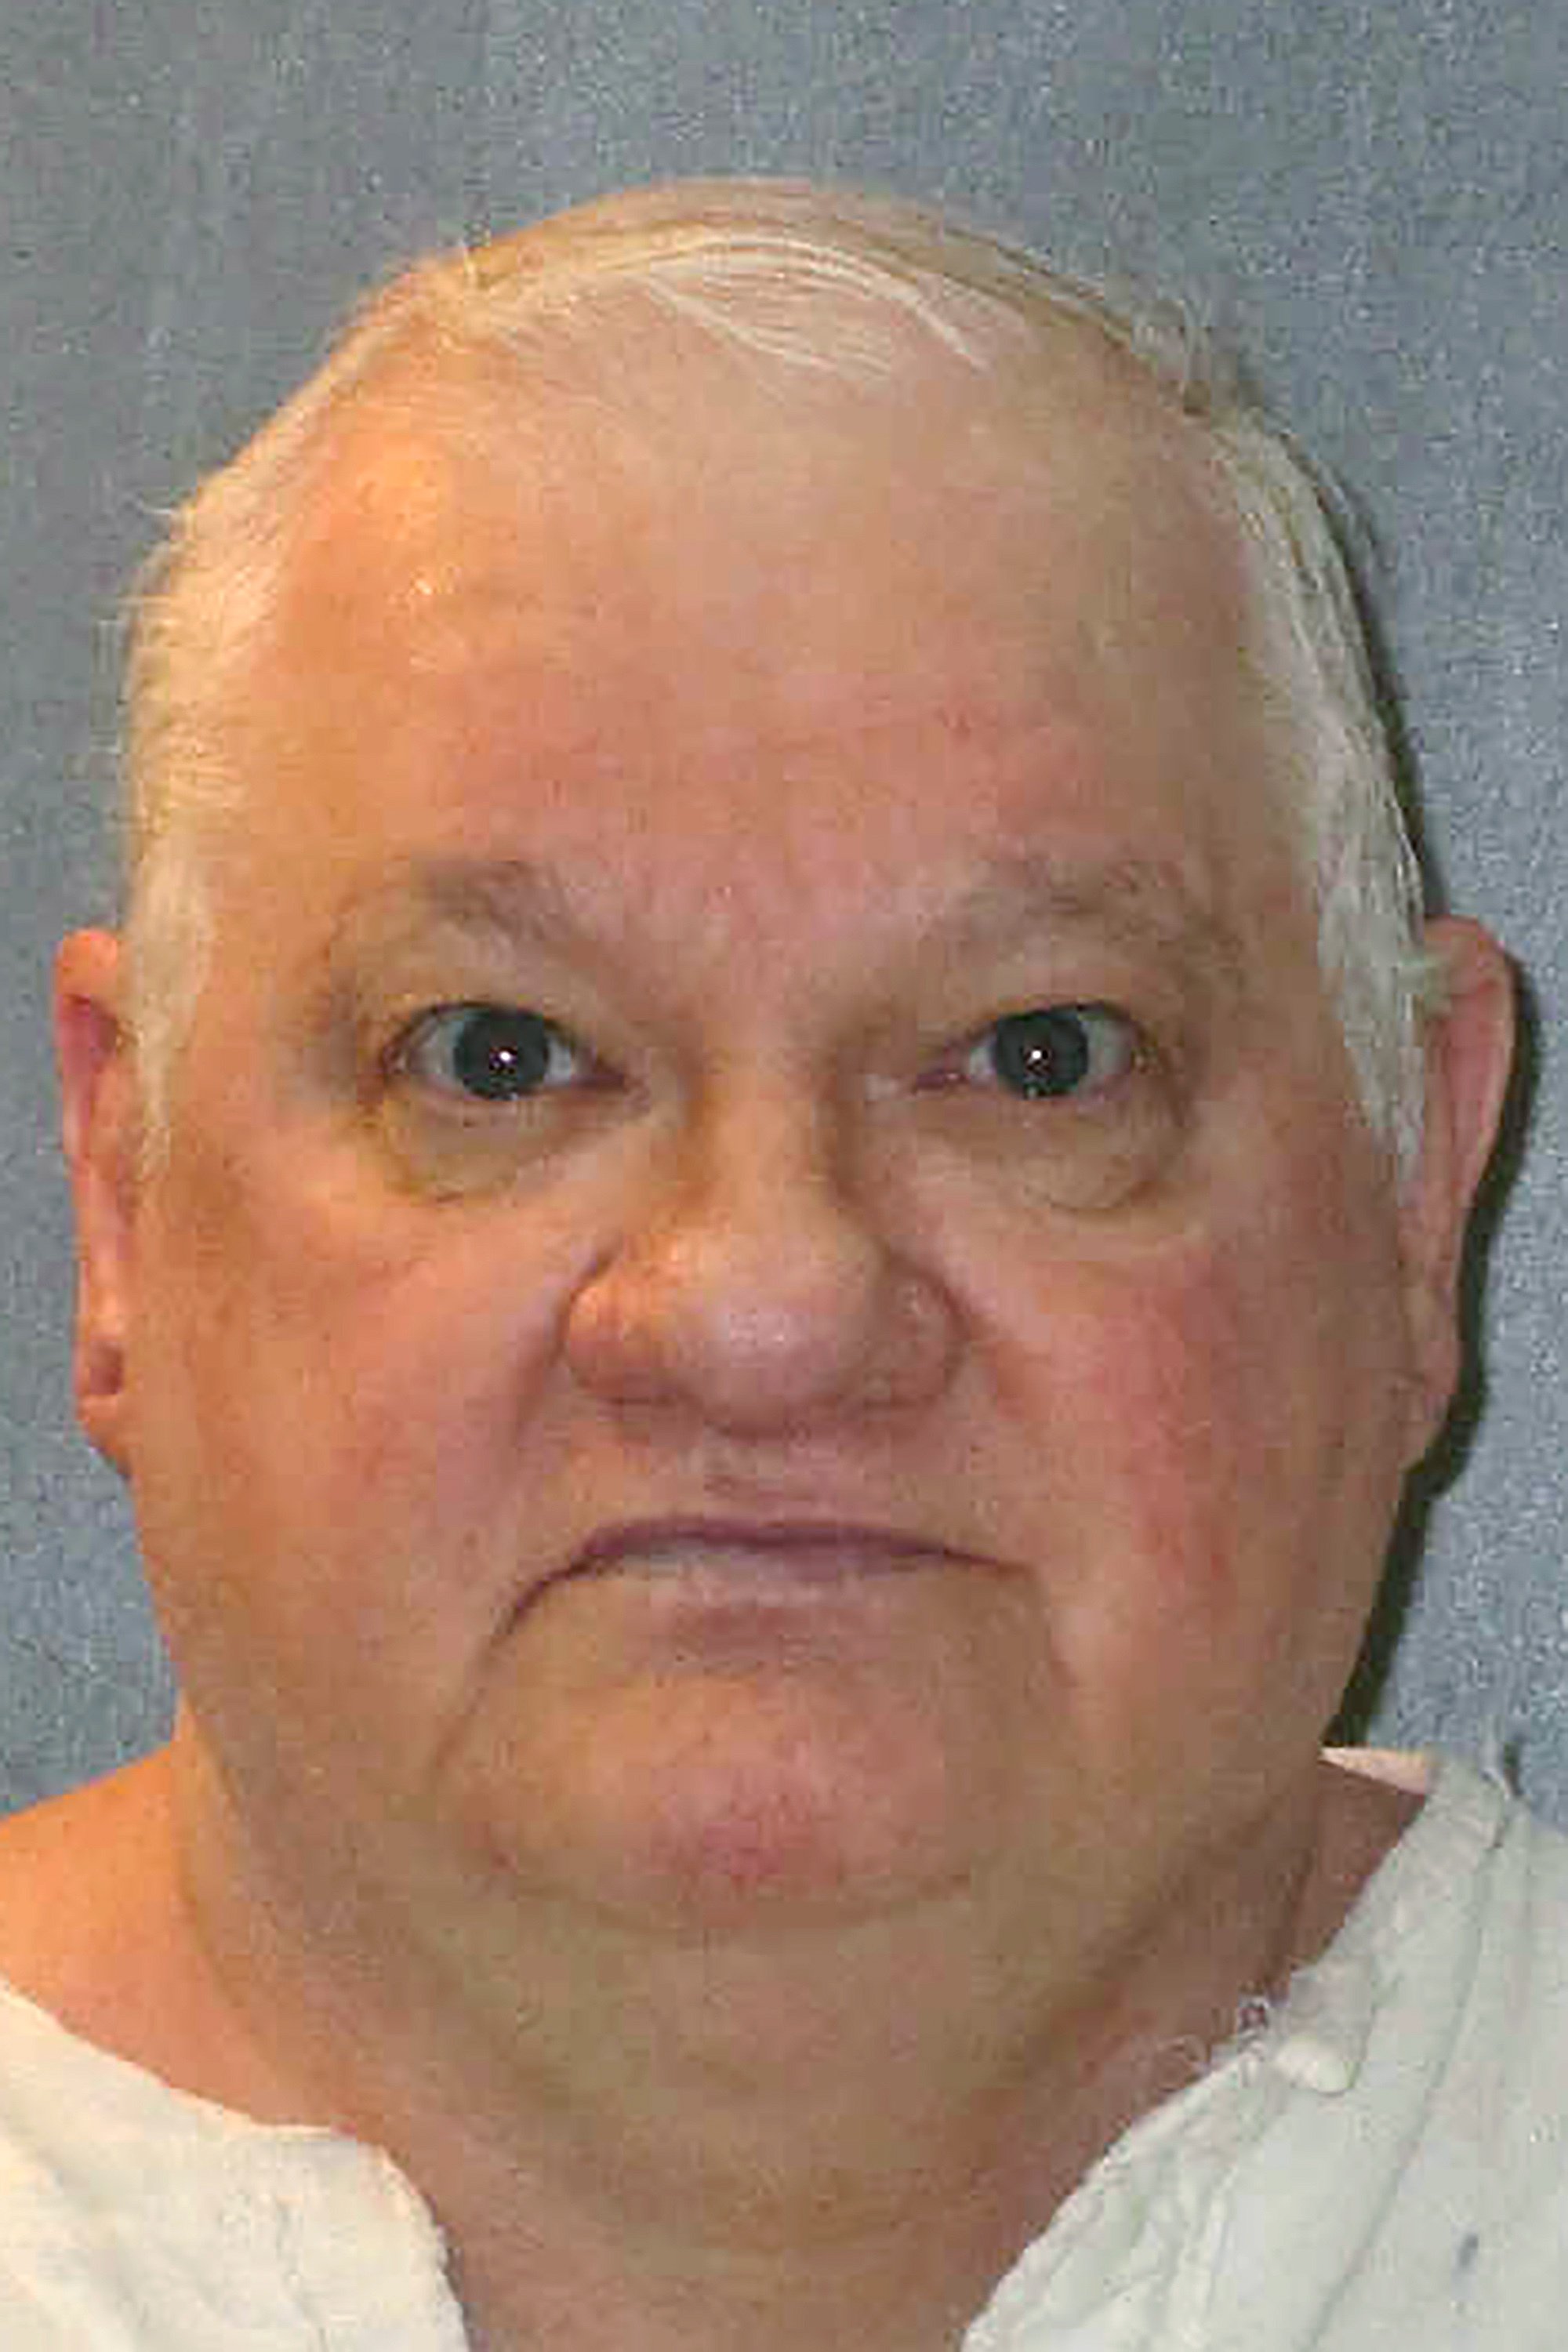 Texas inmate executed for killing 2 women in 2003 AP News